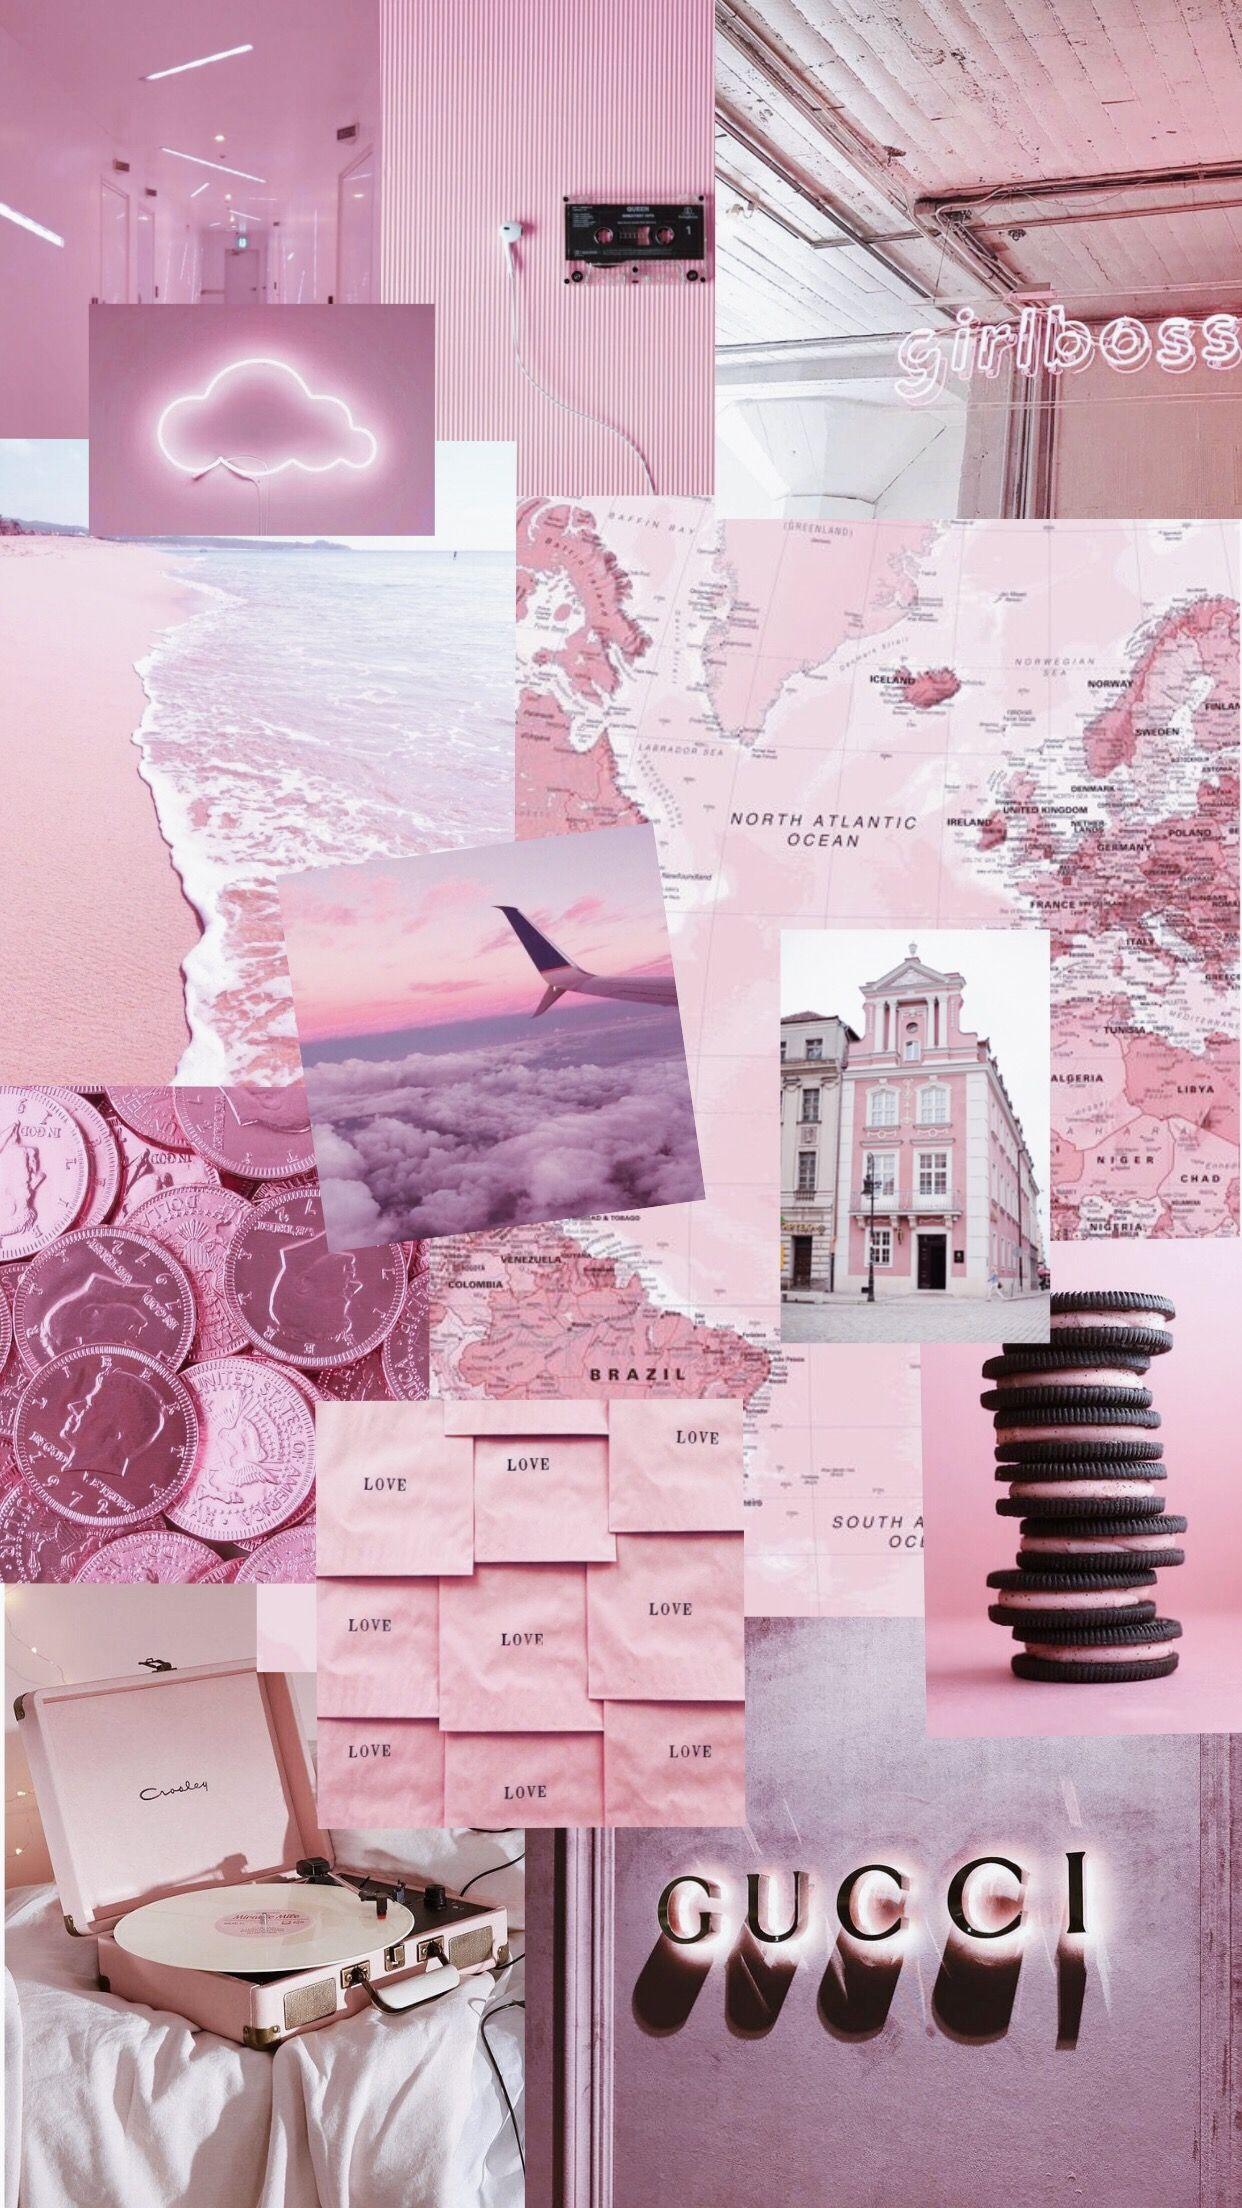 A collage of pictures with pink and white - Pink collage, cute pink, pink phone, 2000s, pink, soft pink, light pink, magenta, Gucci